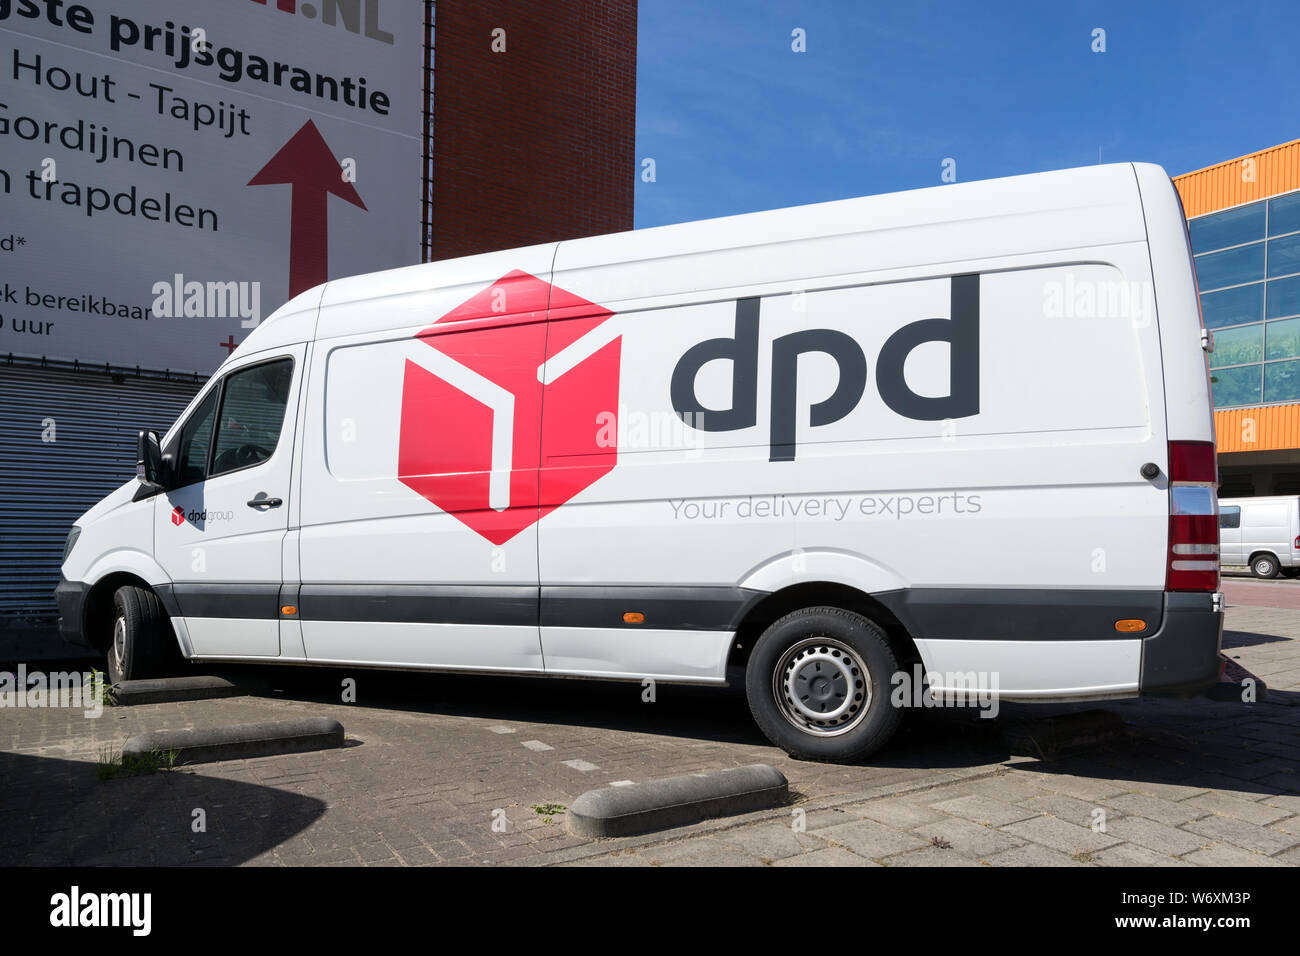 DPD delivery van. DPDgroup is the international parcel delivery network of French state owned postal service, La Poste. Stock Photo